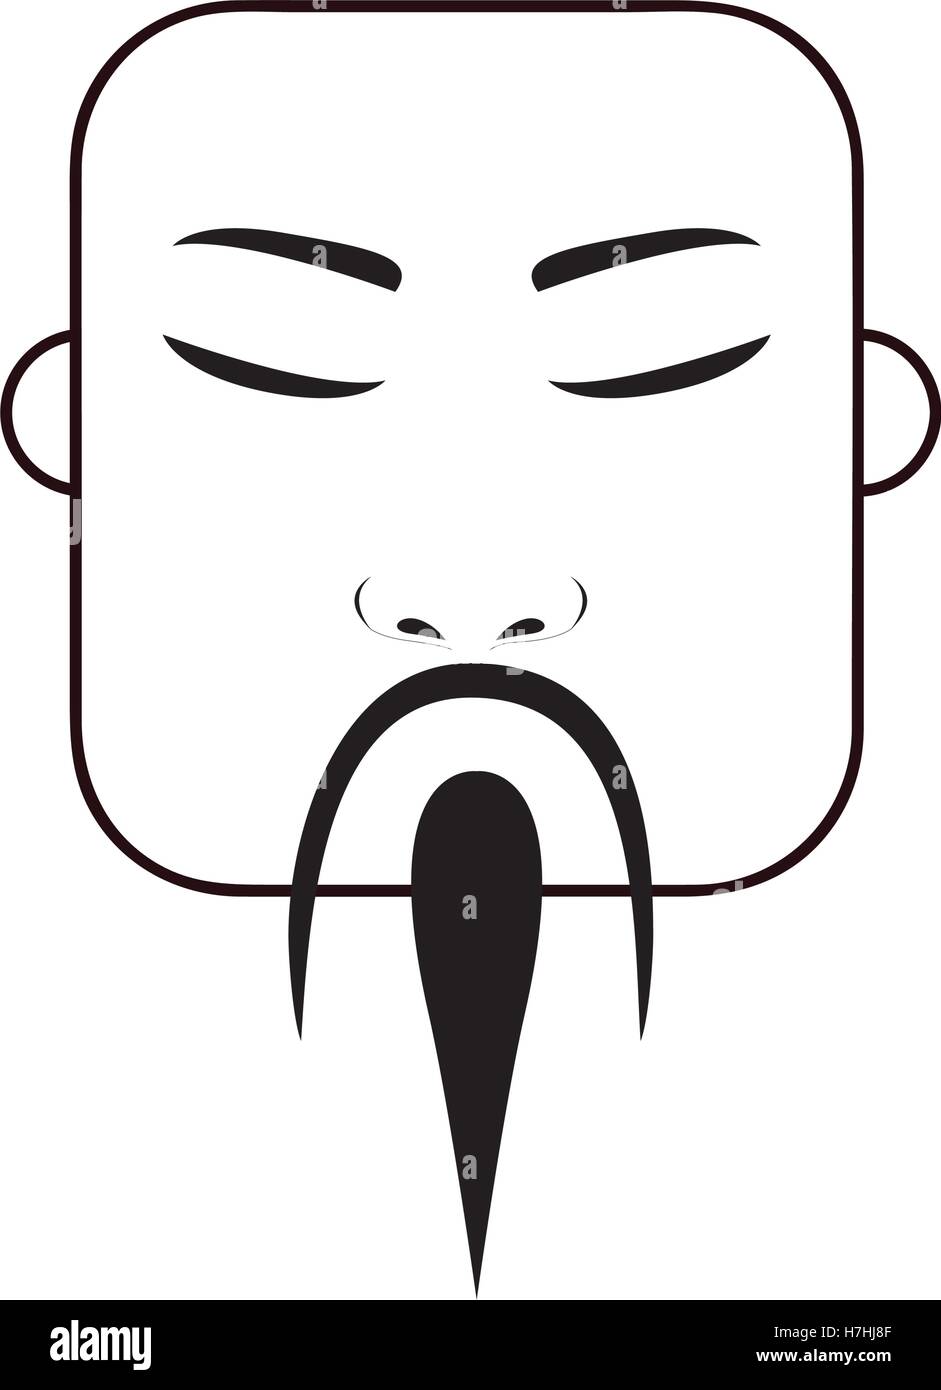 east asian traditional man icon image vector illustration design Stock Vector